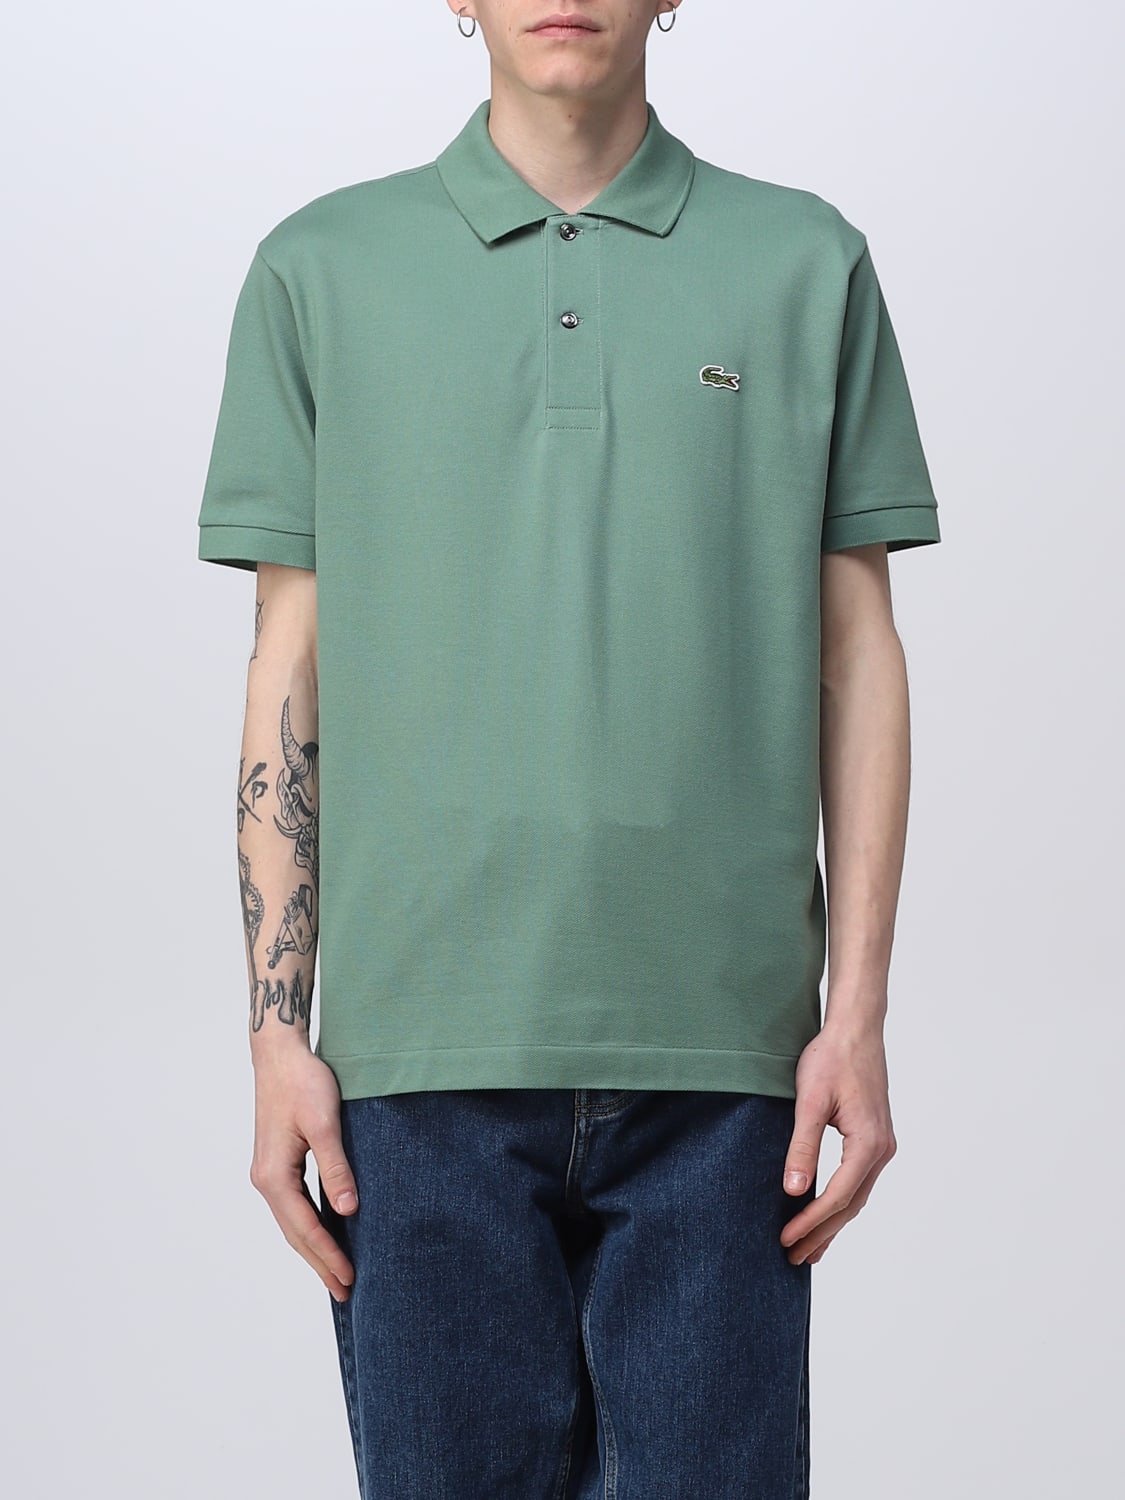 LACOSTE: polo shirt for man Forest Green | Lacoste polo shirt AB1212 online at GIGLIO.COM